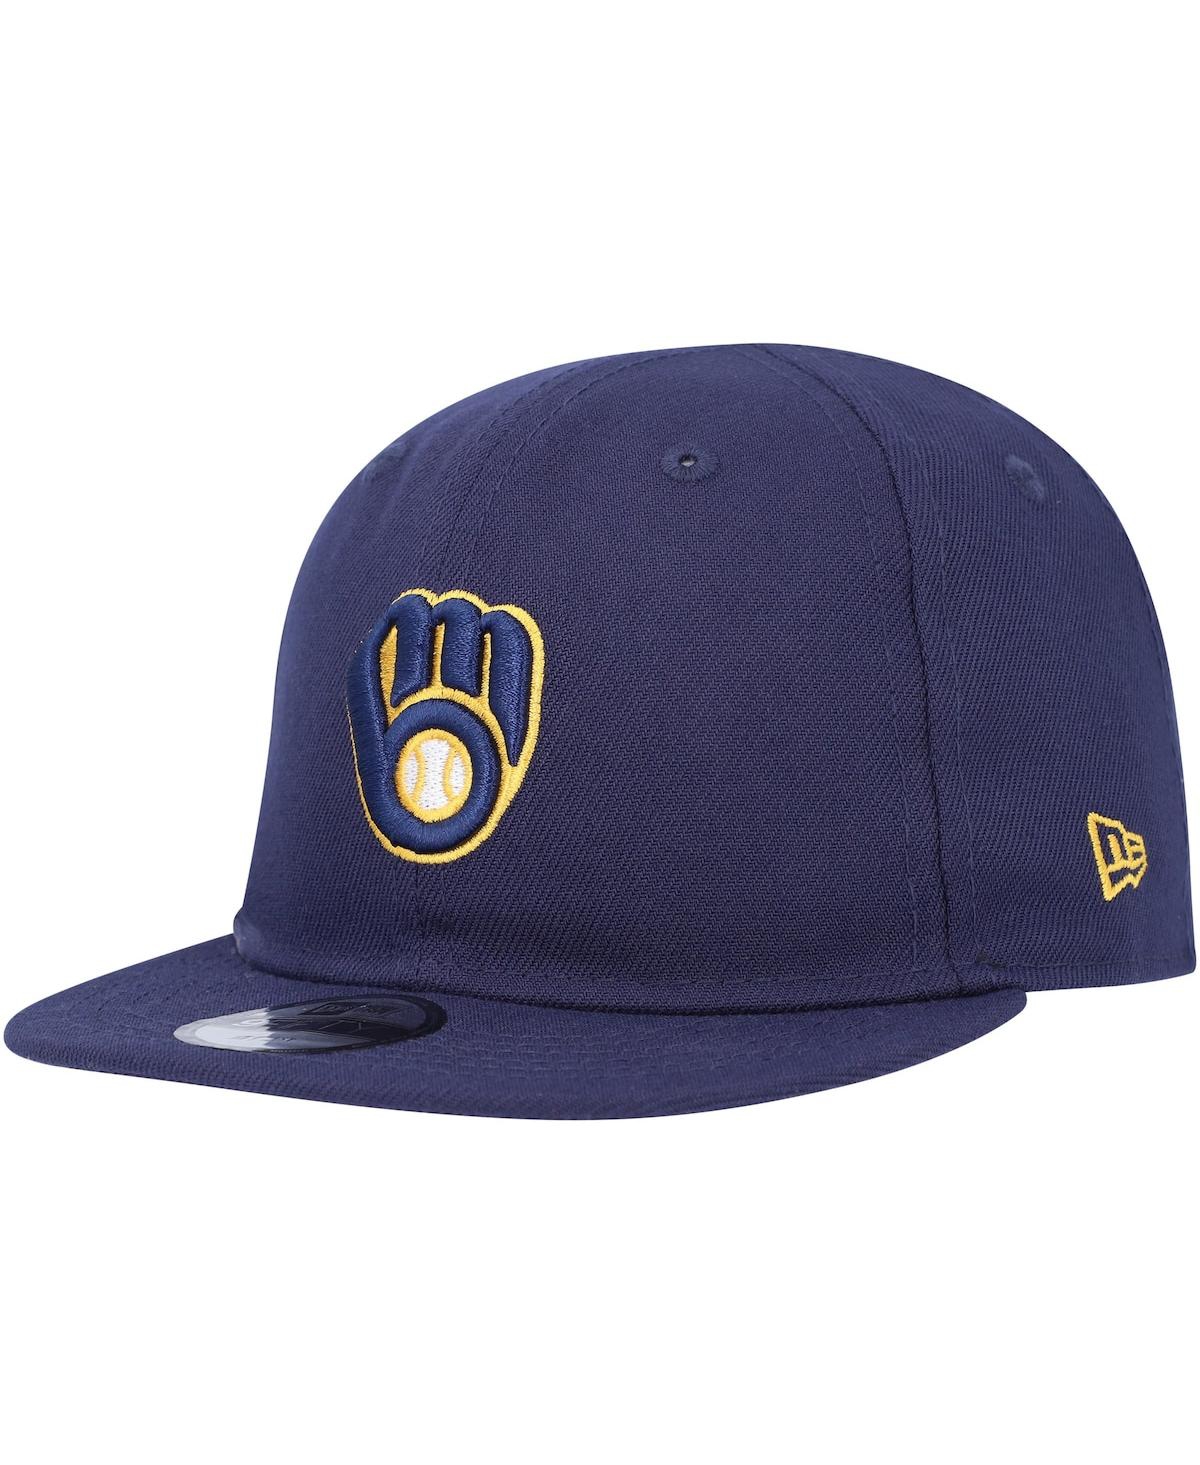 New Era Babies' Infant Boys And Girls  Navy Milwaukee Brewers My First 9fifty Adjustable Hat